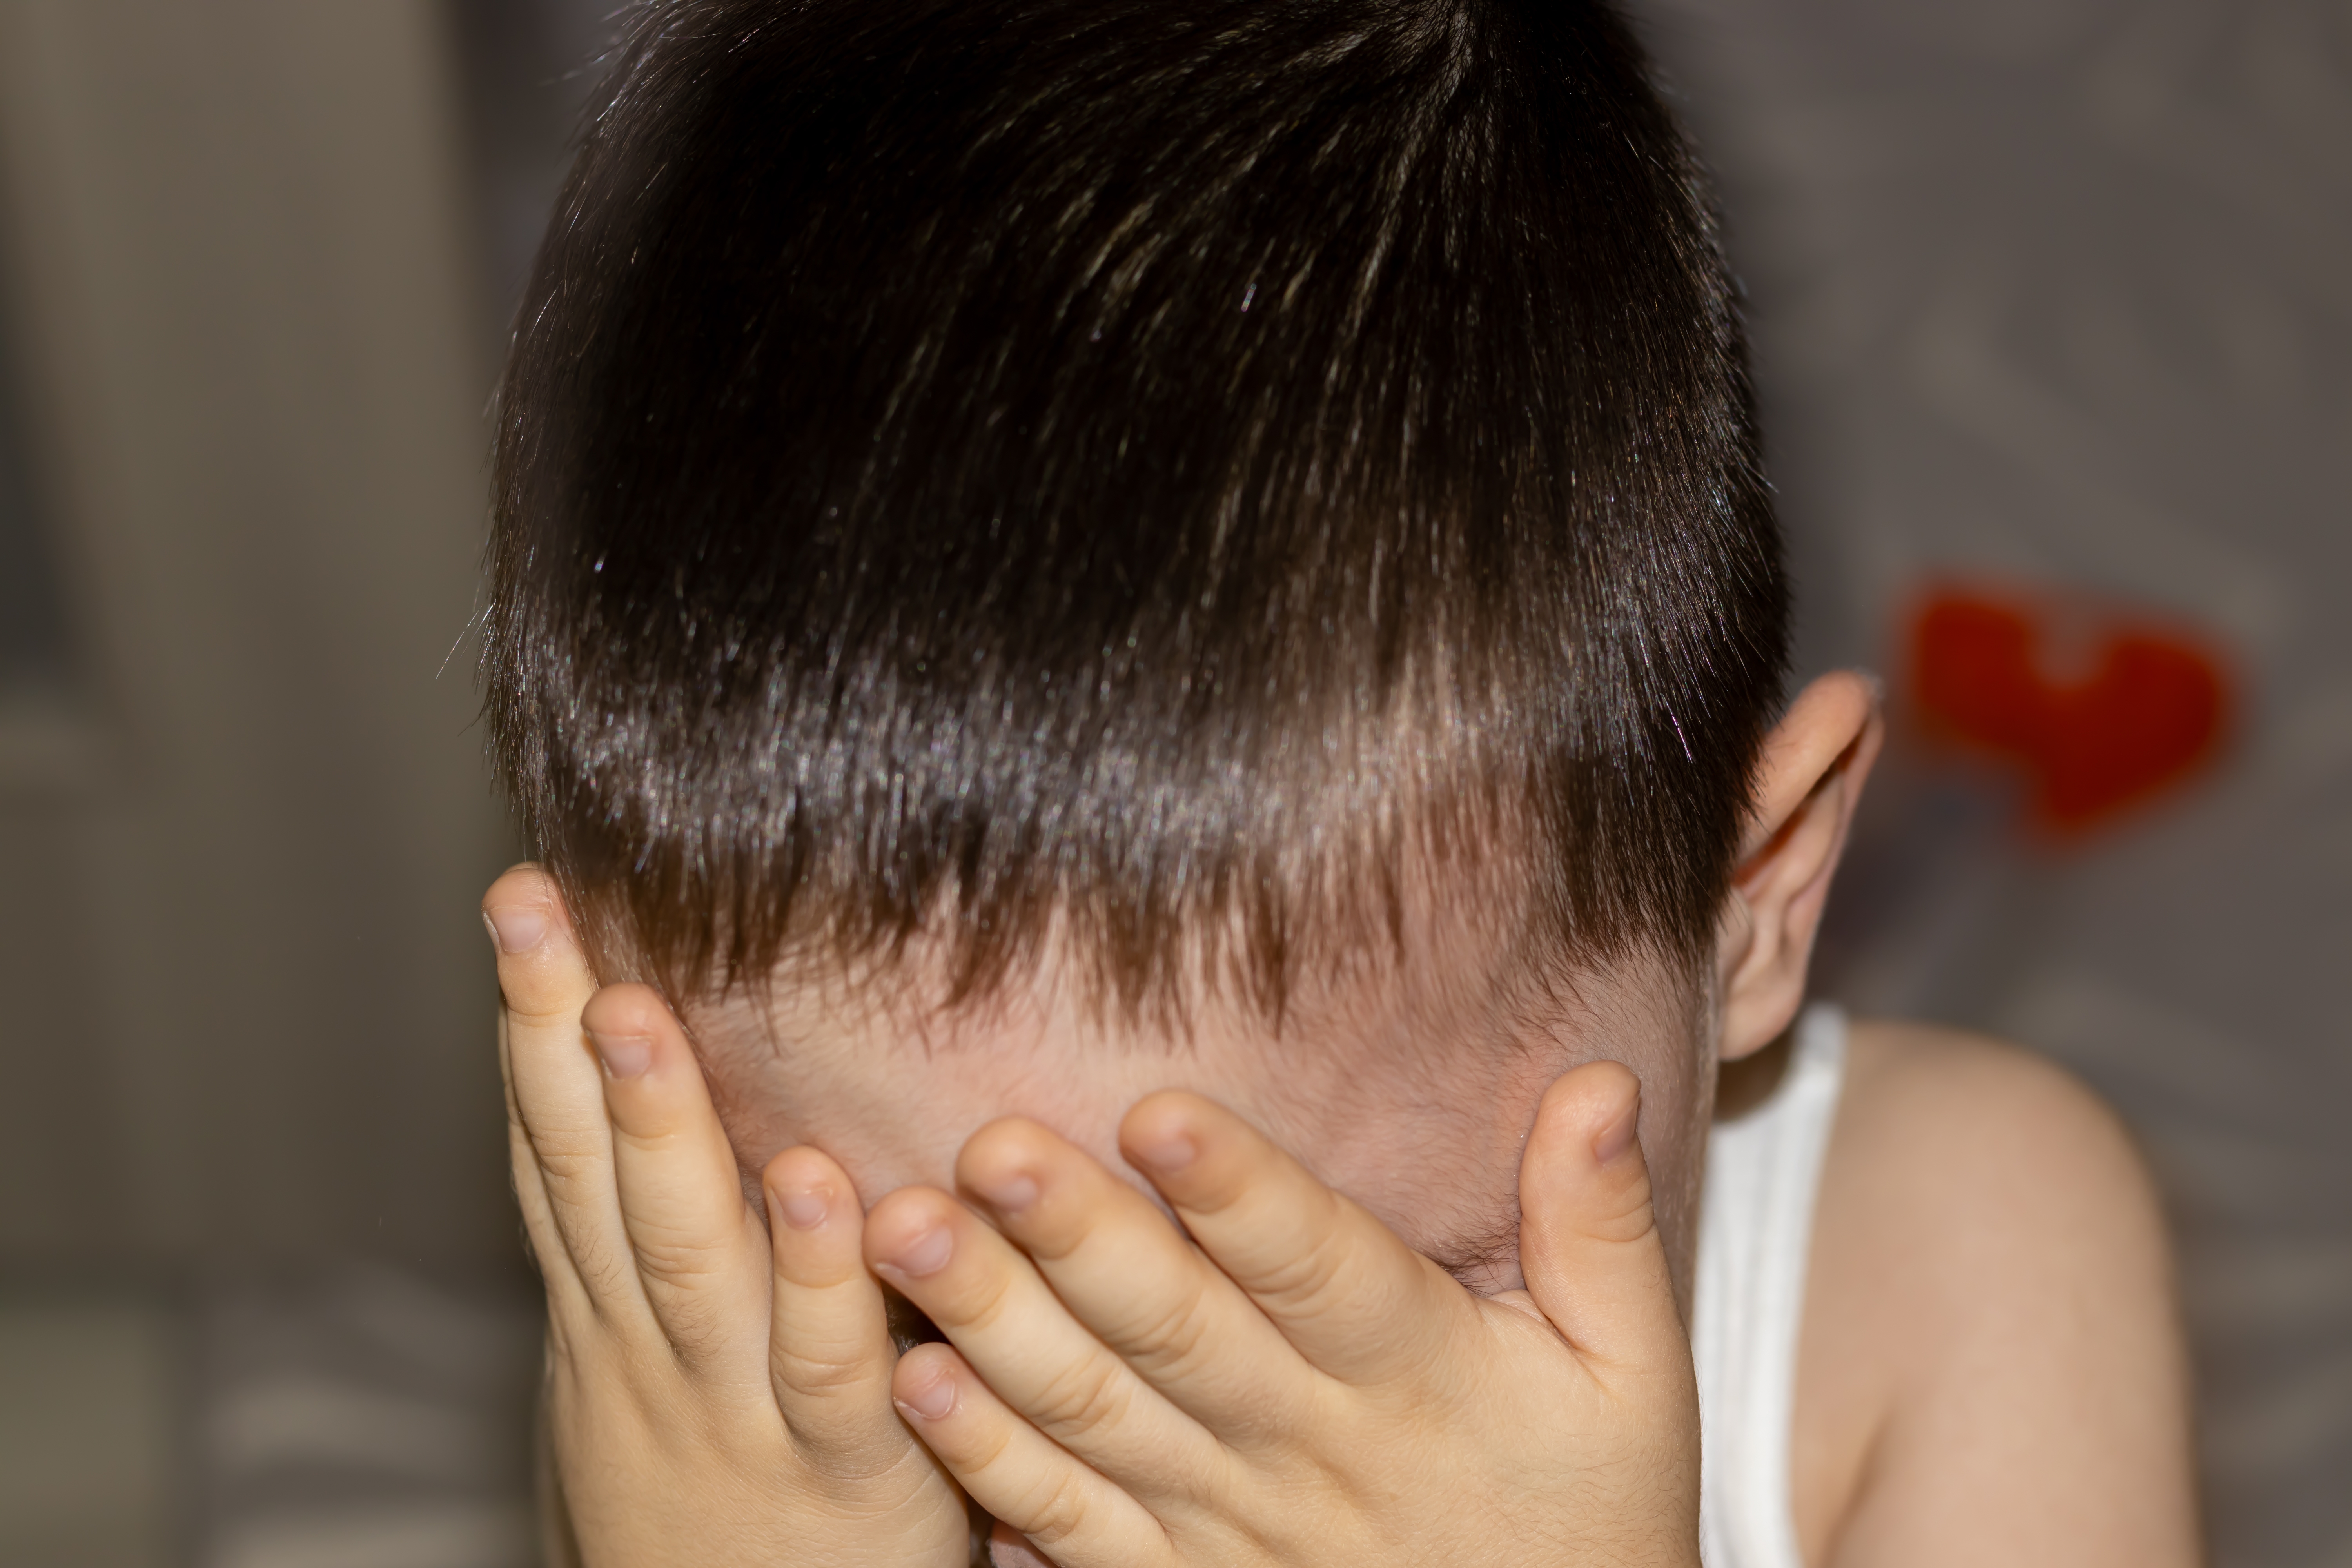 A child hiding his face | Source: Shutterstock